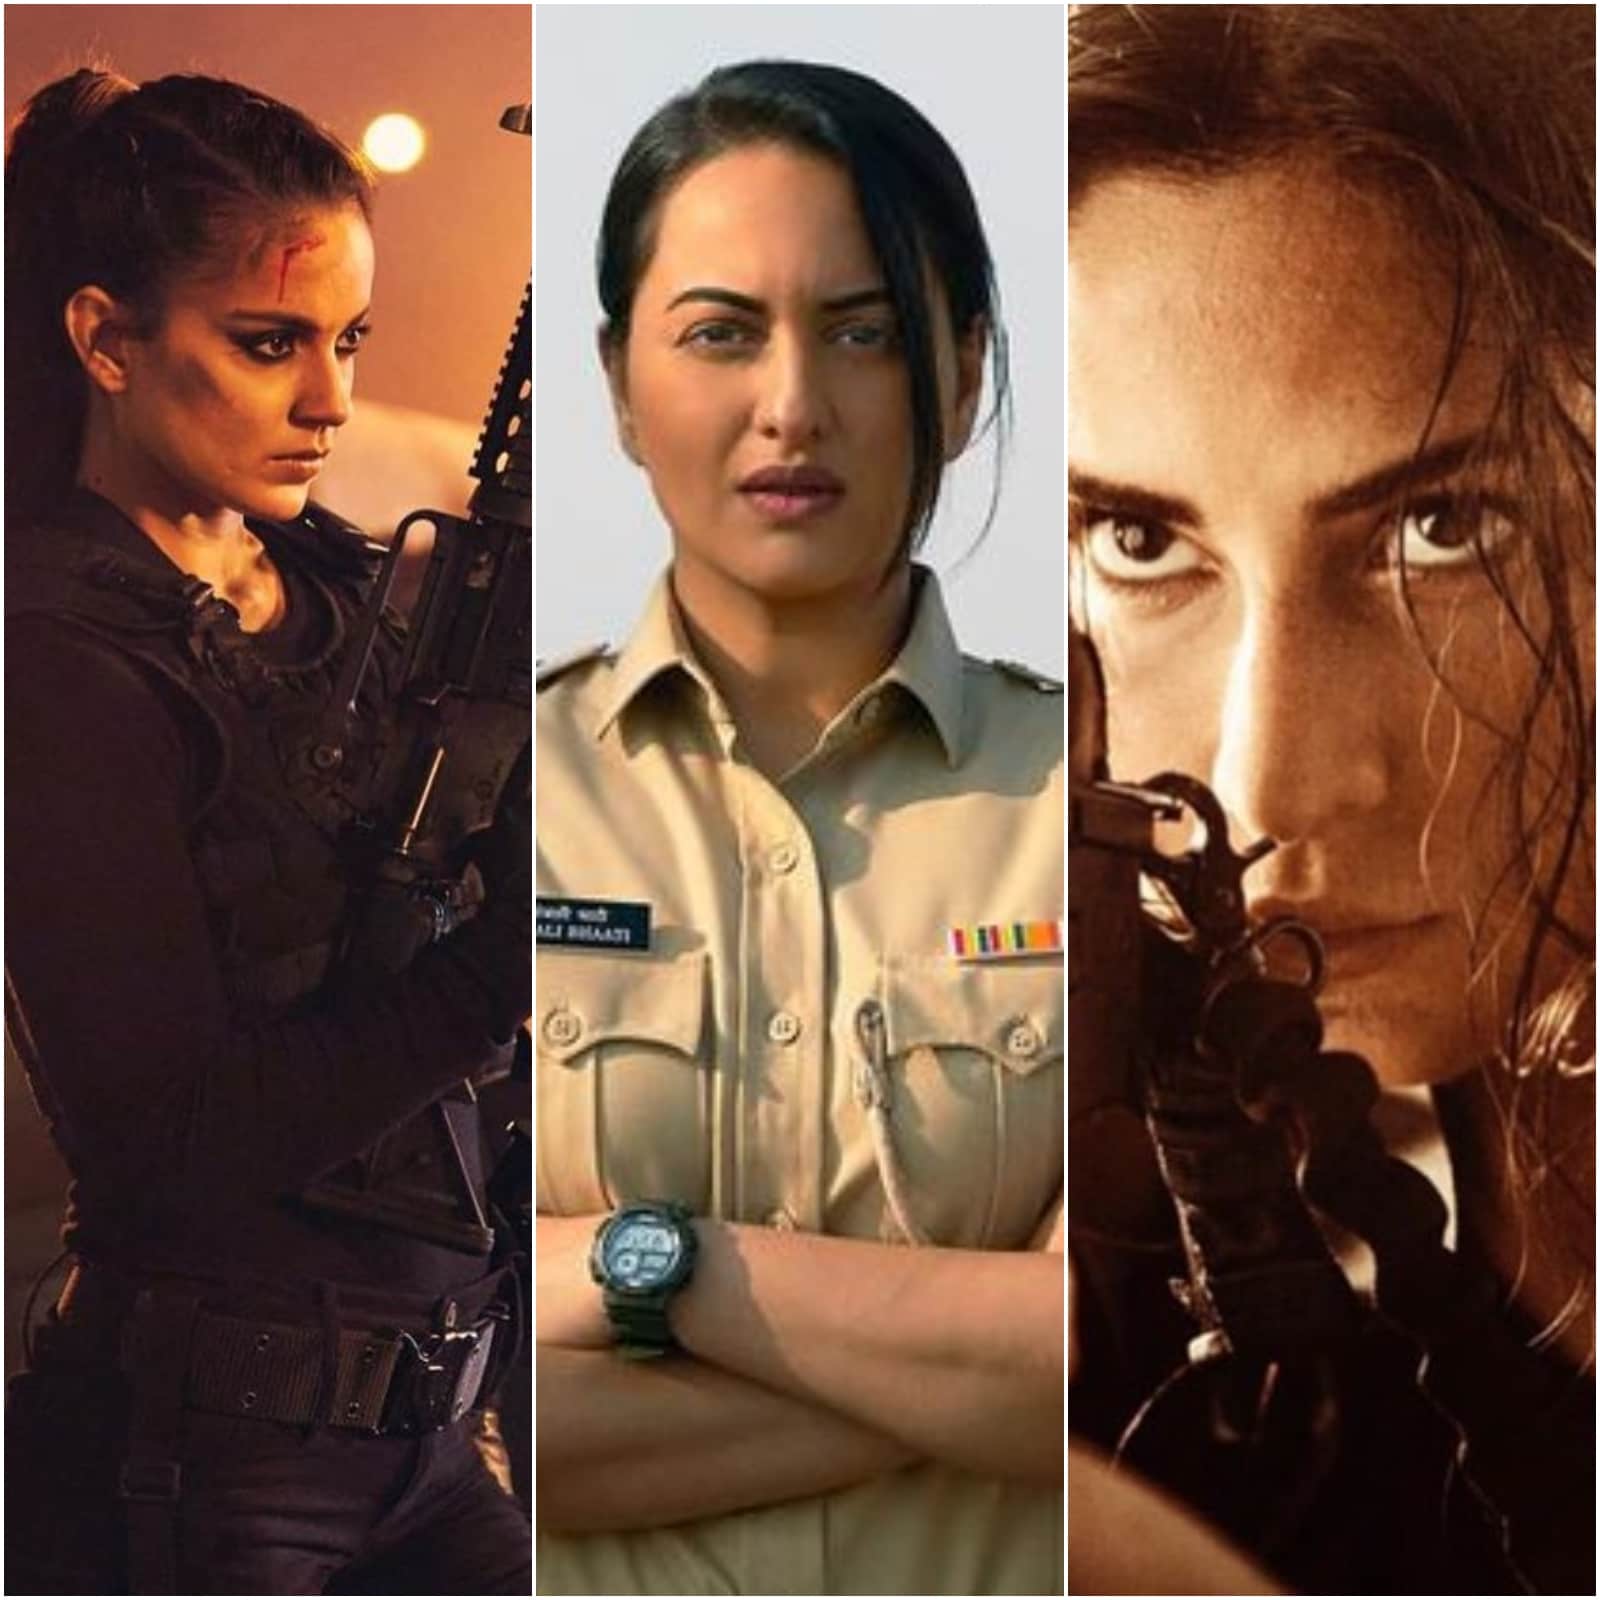 Xxxx Hot Video Girls Video - Deepika Padukone, Katrina Kaif, Sonakshi Sinha and Other Bollywood  Actresses Take on Action Roles